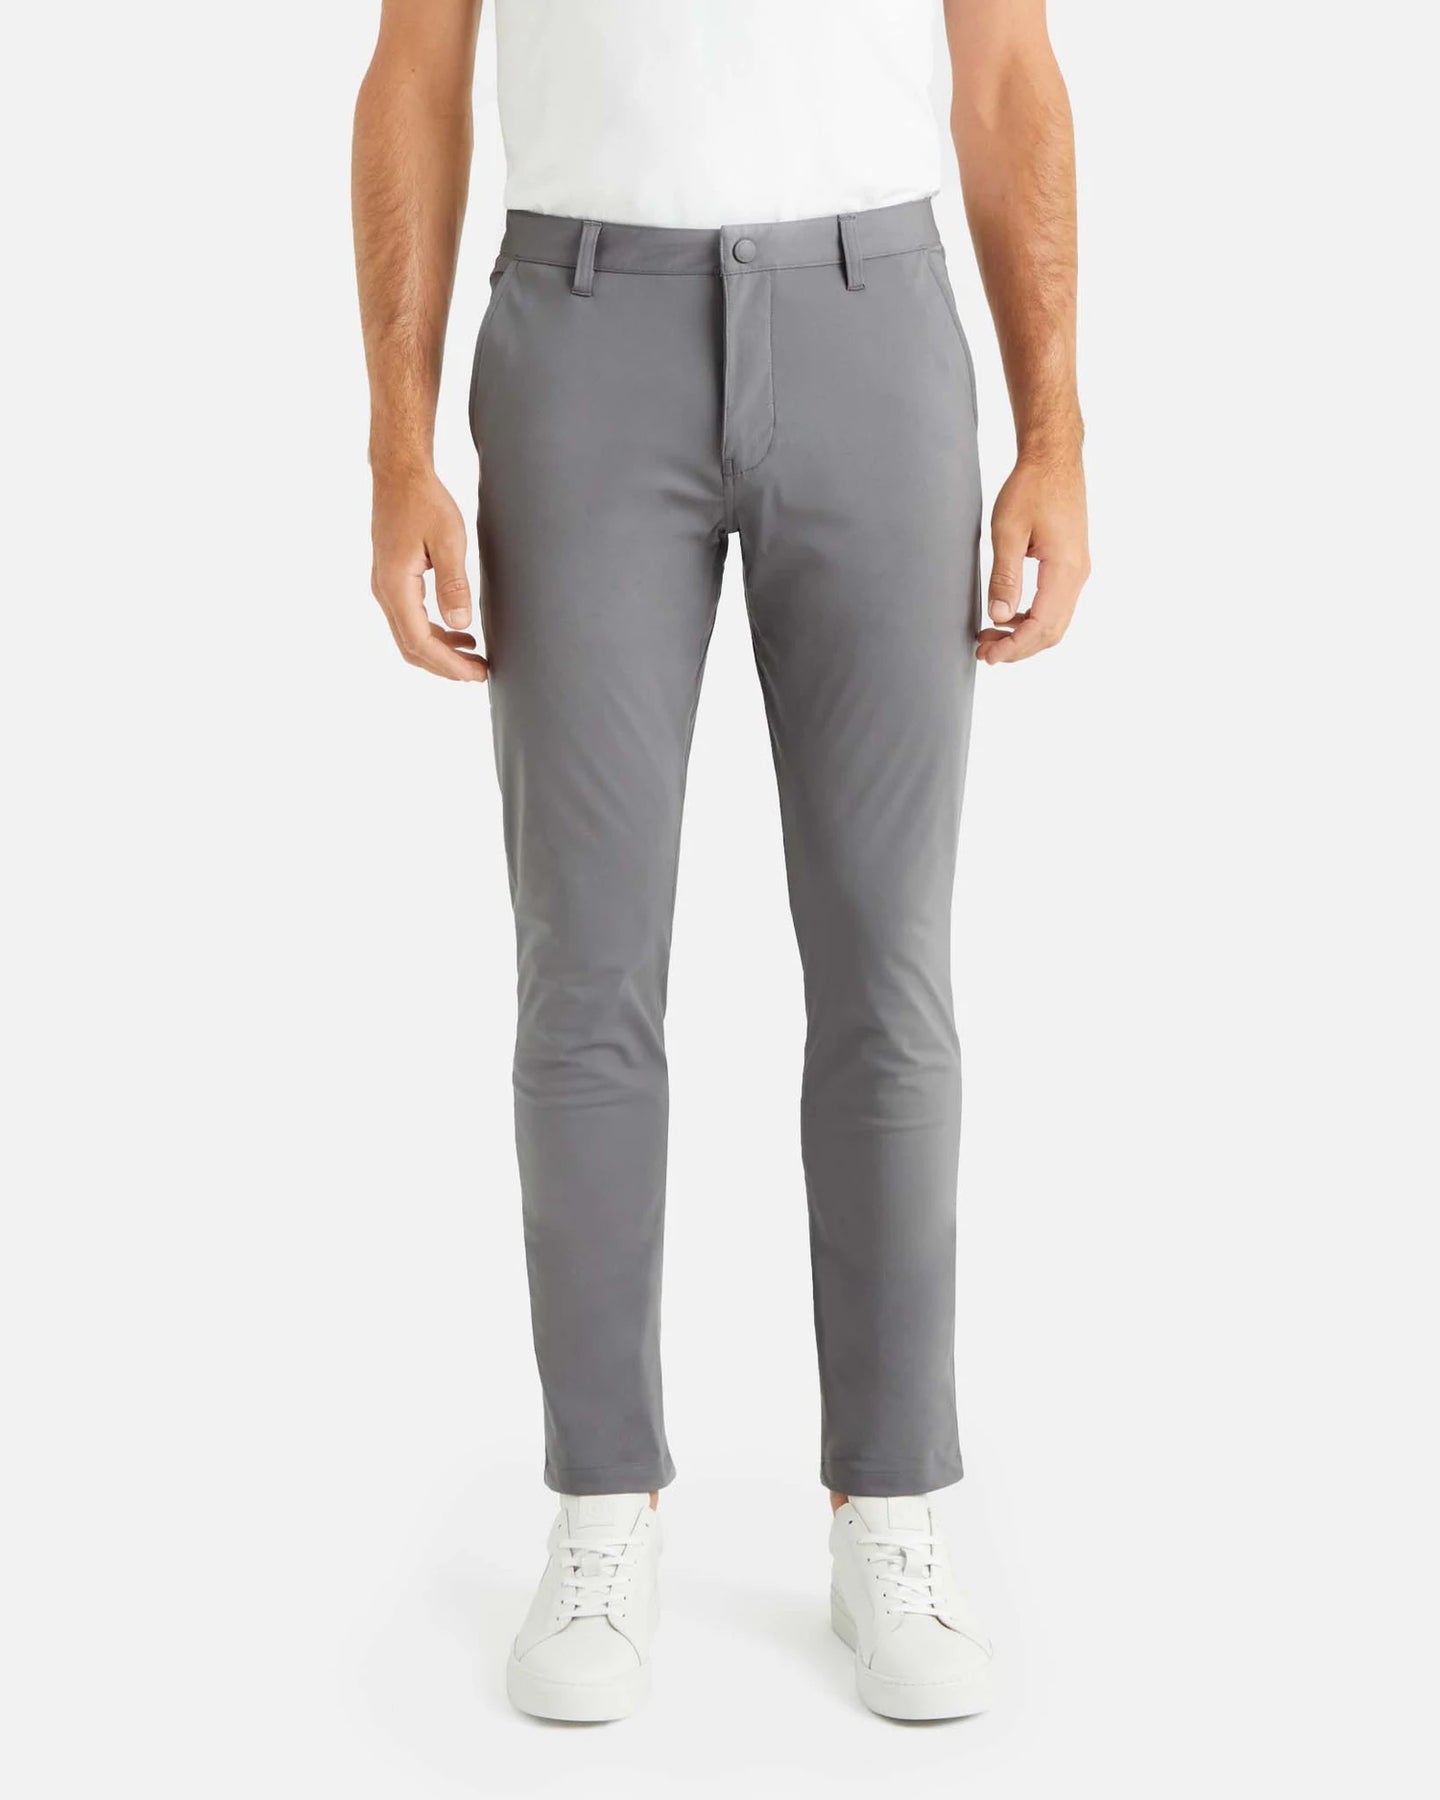 FORM SEAMLESS 25IN MIDI PANT in GREY MARLE